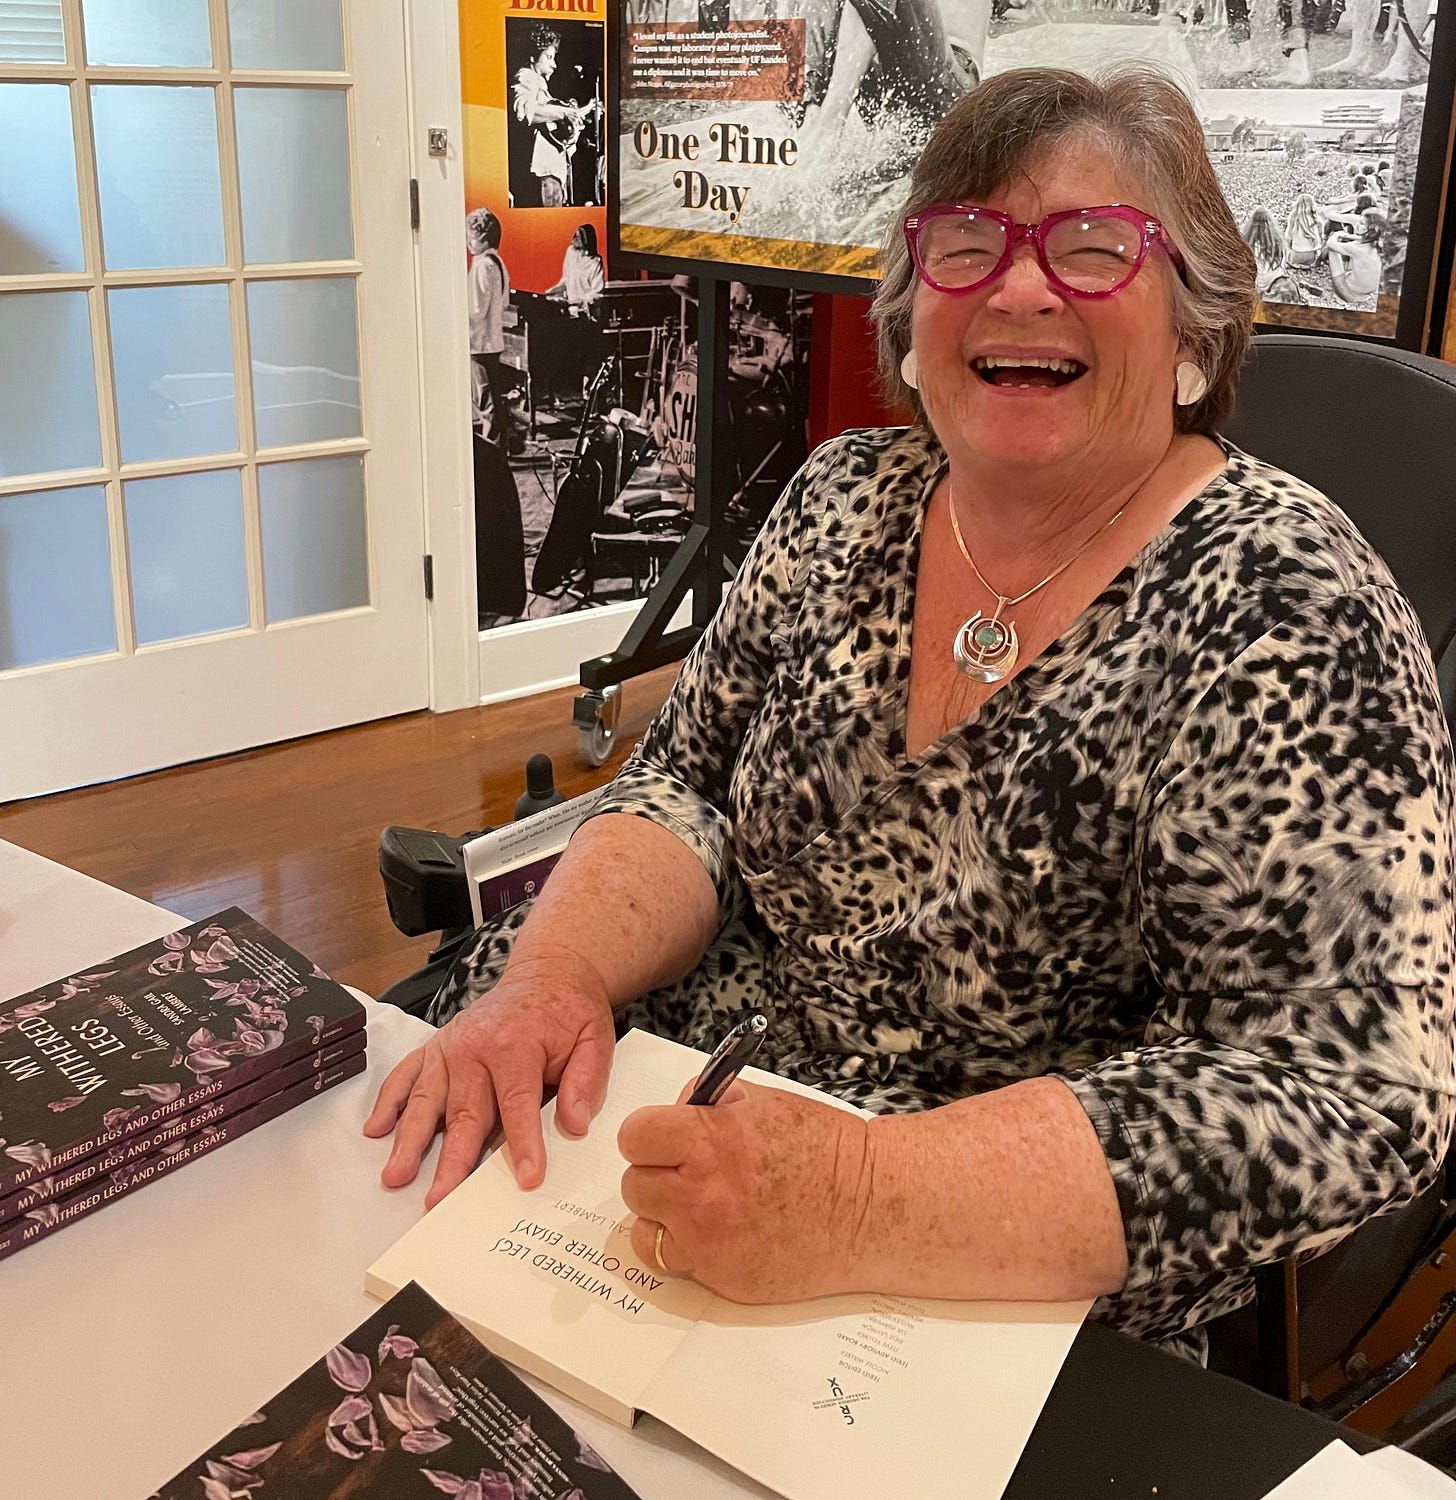 An older white woman smiling big and signing books. She's wearing a black and white dress, a silver necklace, white enamel earrings, and pink glasses. 